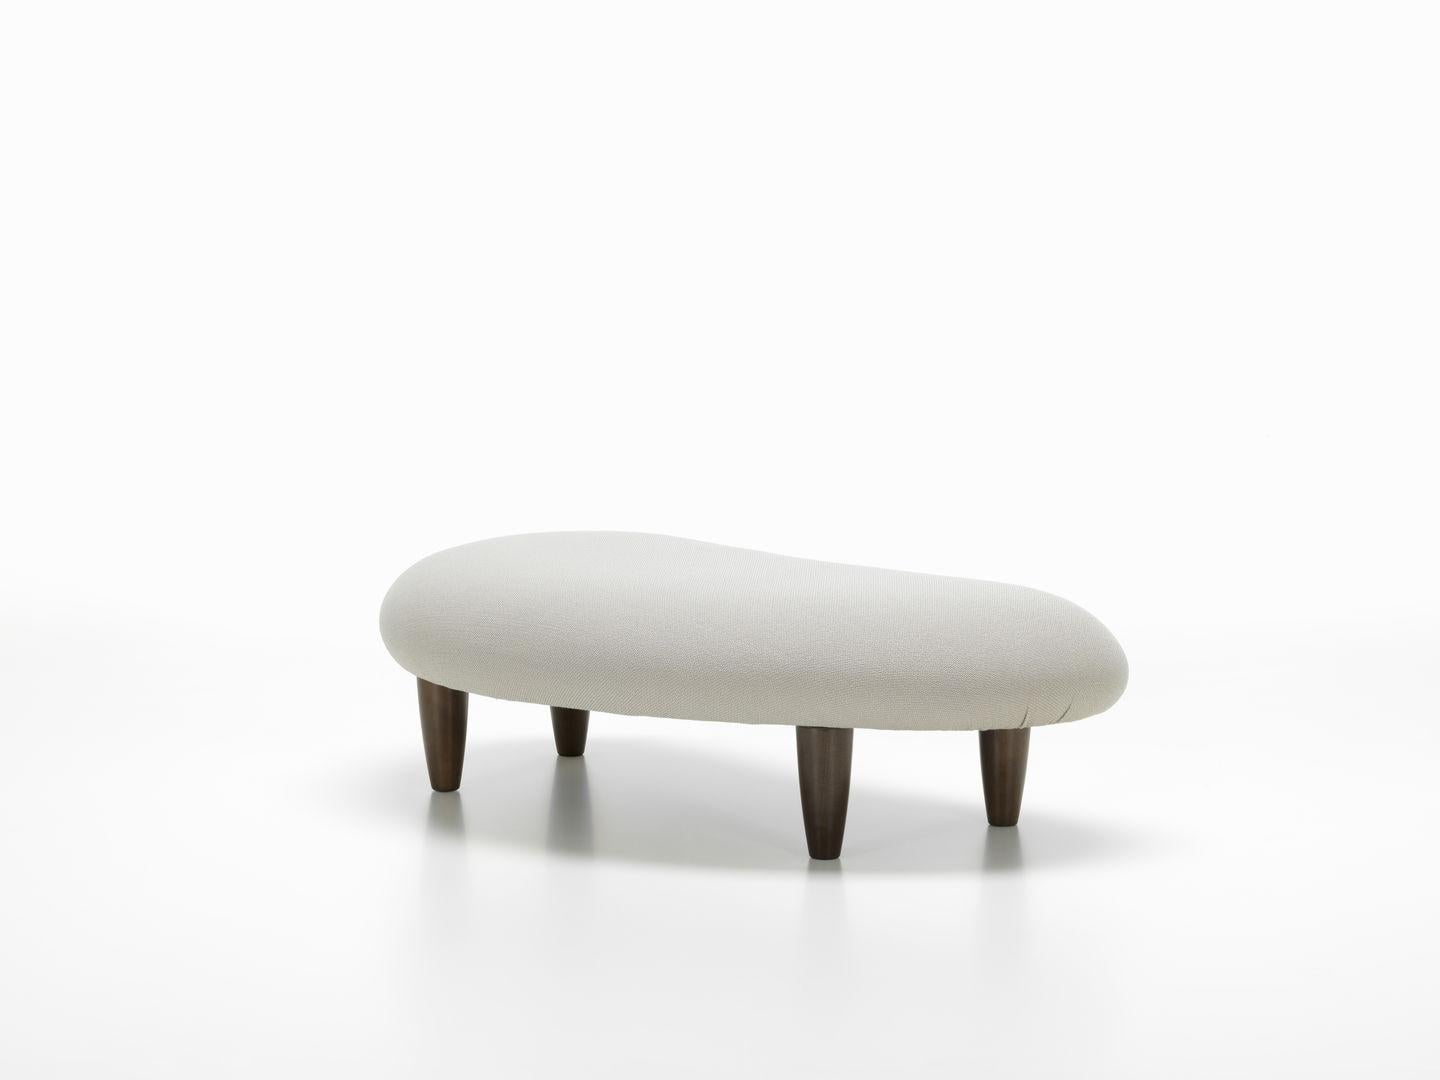 Ottoman designed by Isamu Noguchi in 1946.
Manufactured by Vitra, Switzerland.

As a companion piece, the Freeform ottoman can be freely positioned around the sofa, allowing users to enjoy the latter's full comfort.

Production delay:
8-9